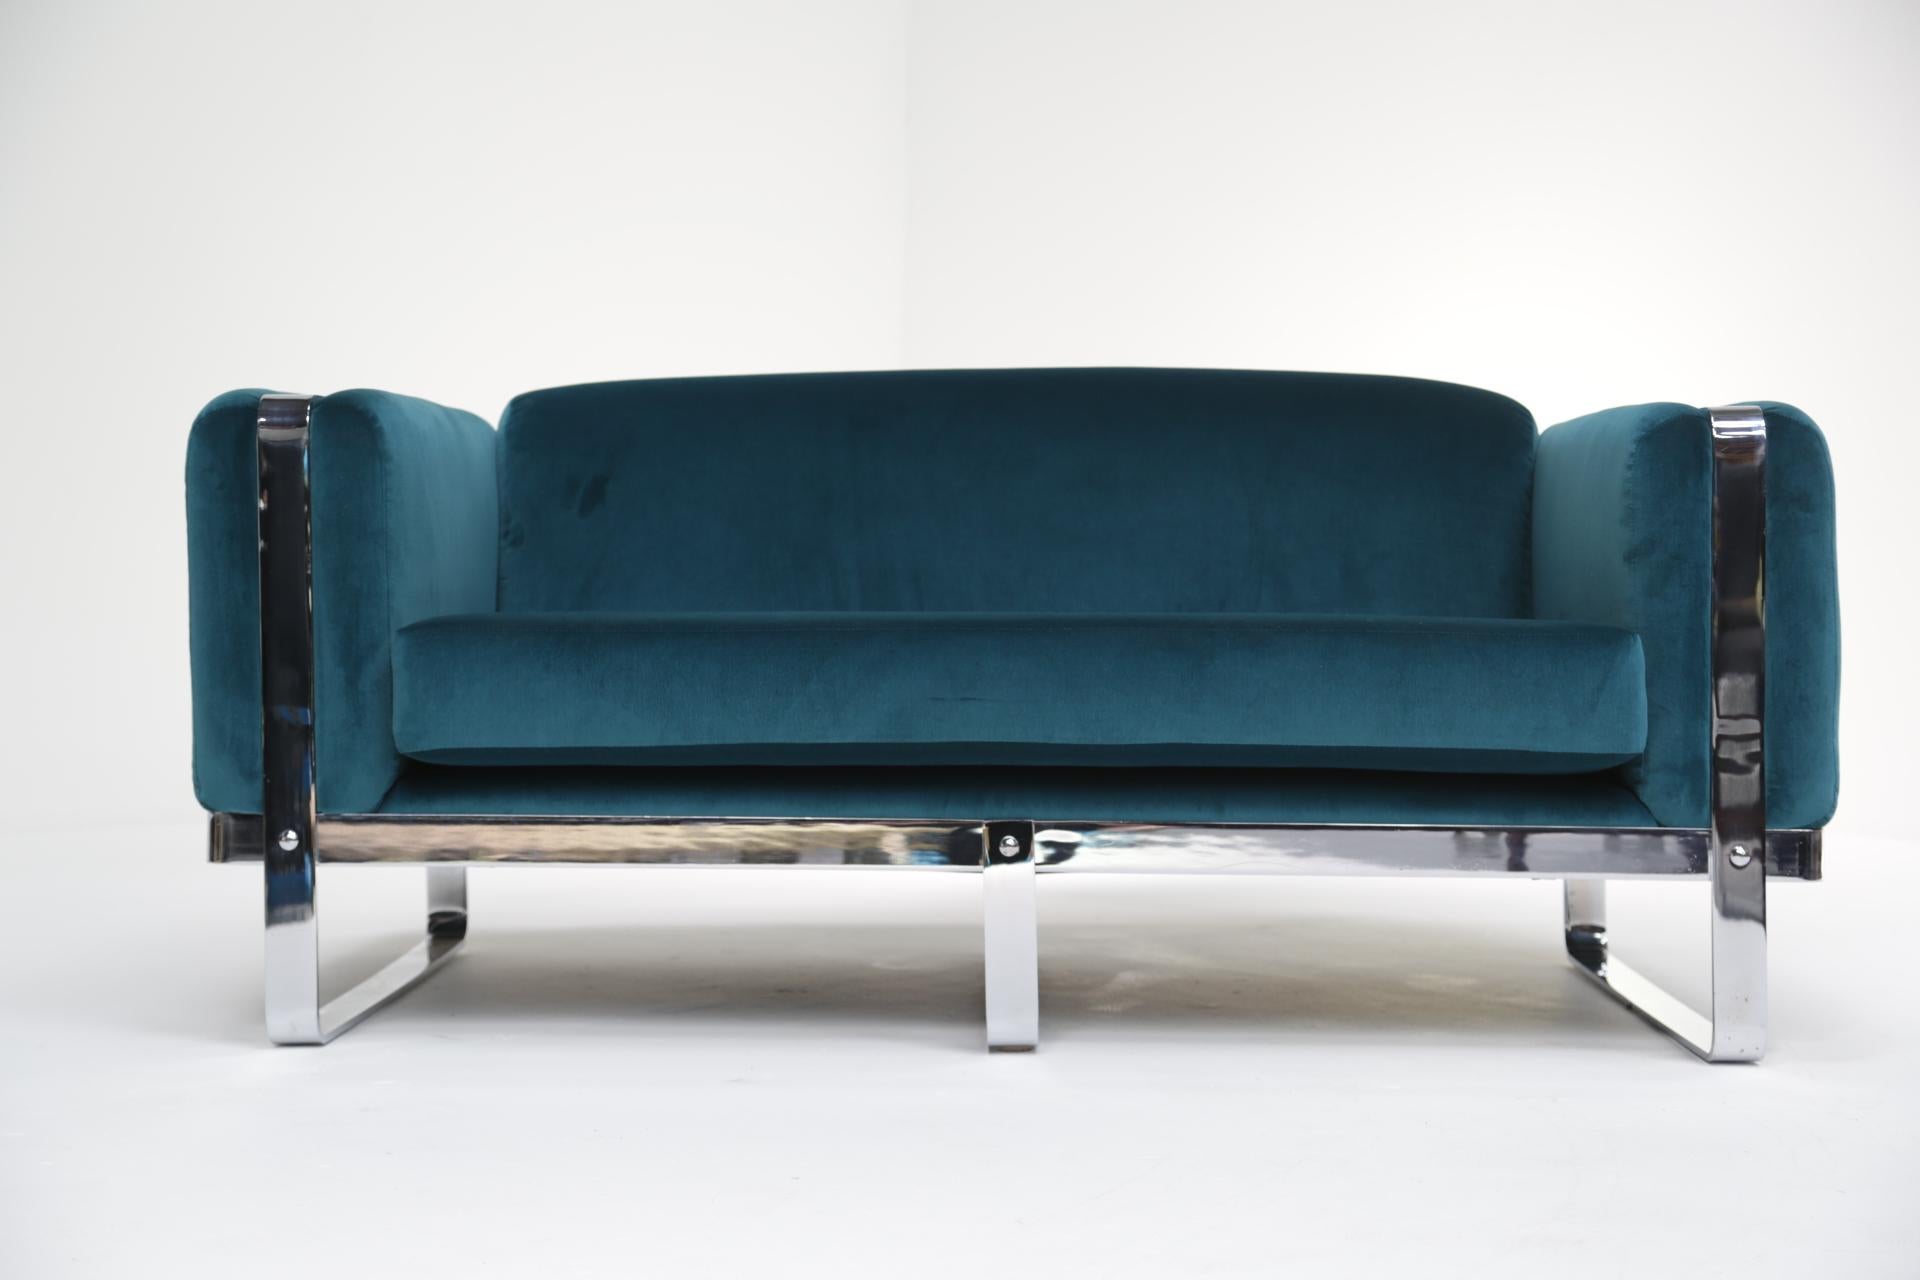 Plated Carolina Seating Company mid-century chrome loveseat sofa in teal velvet. For Sale